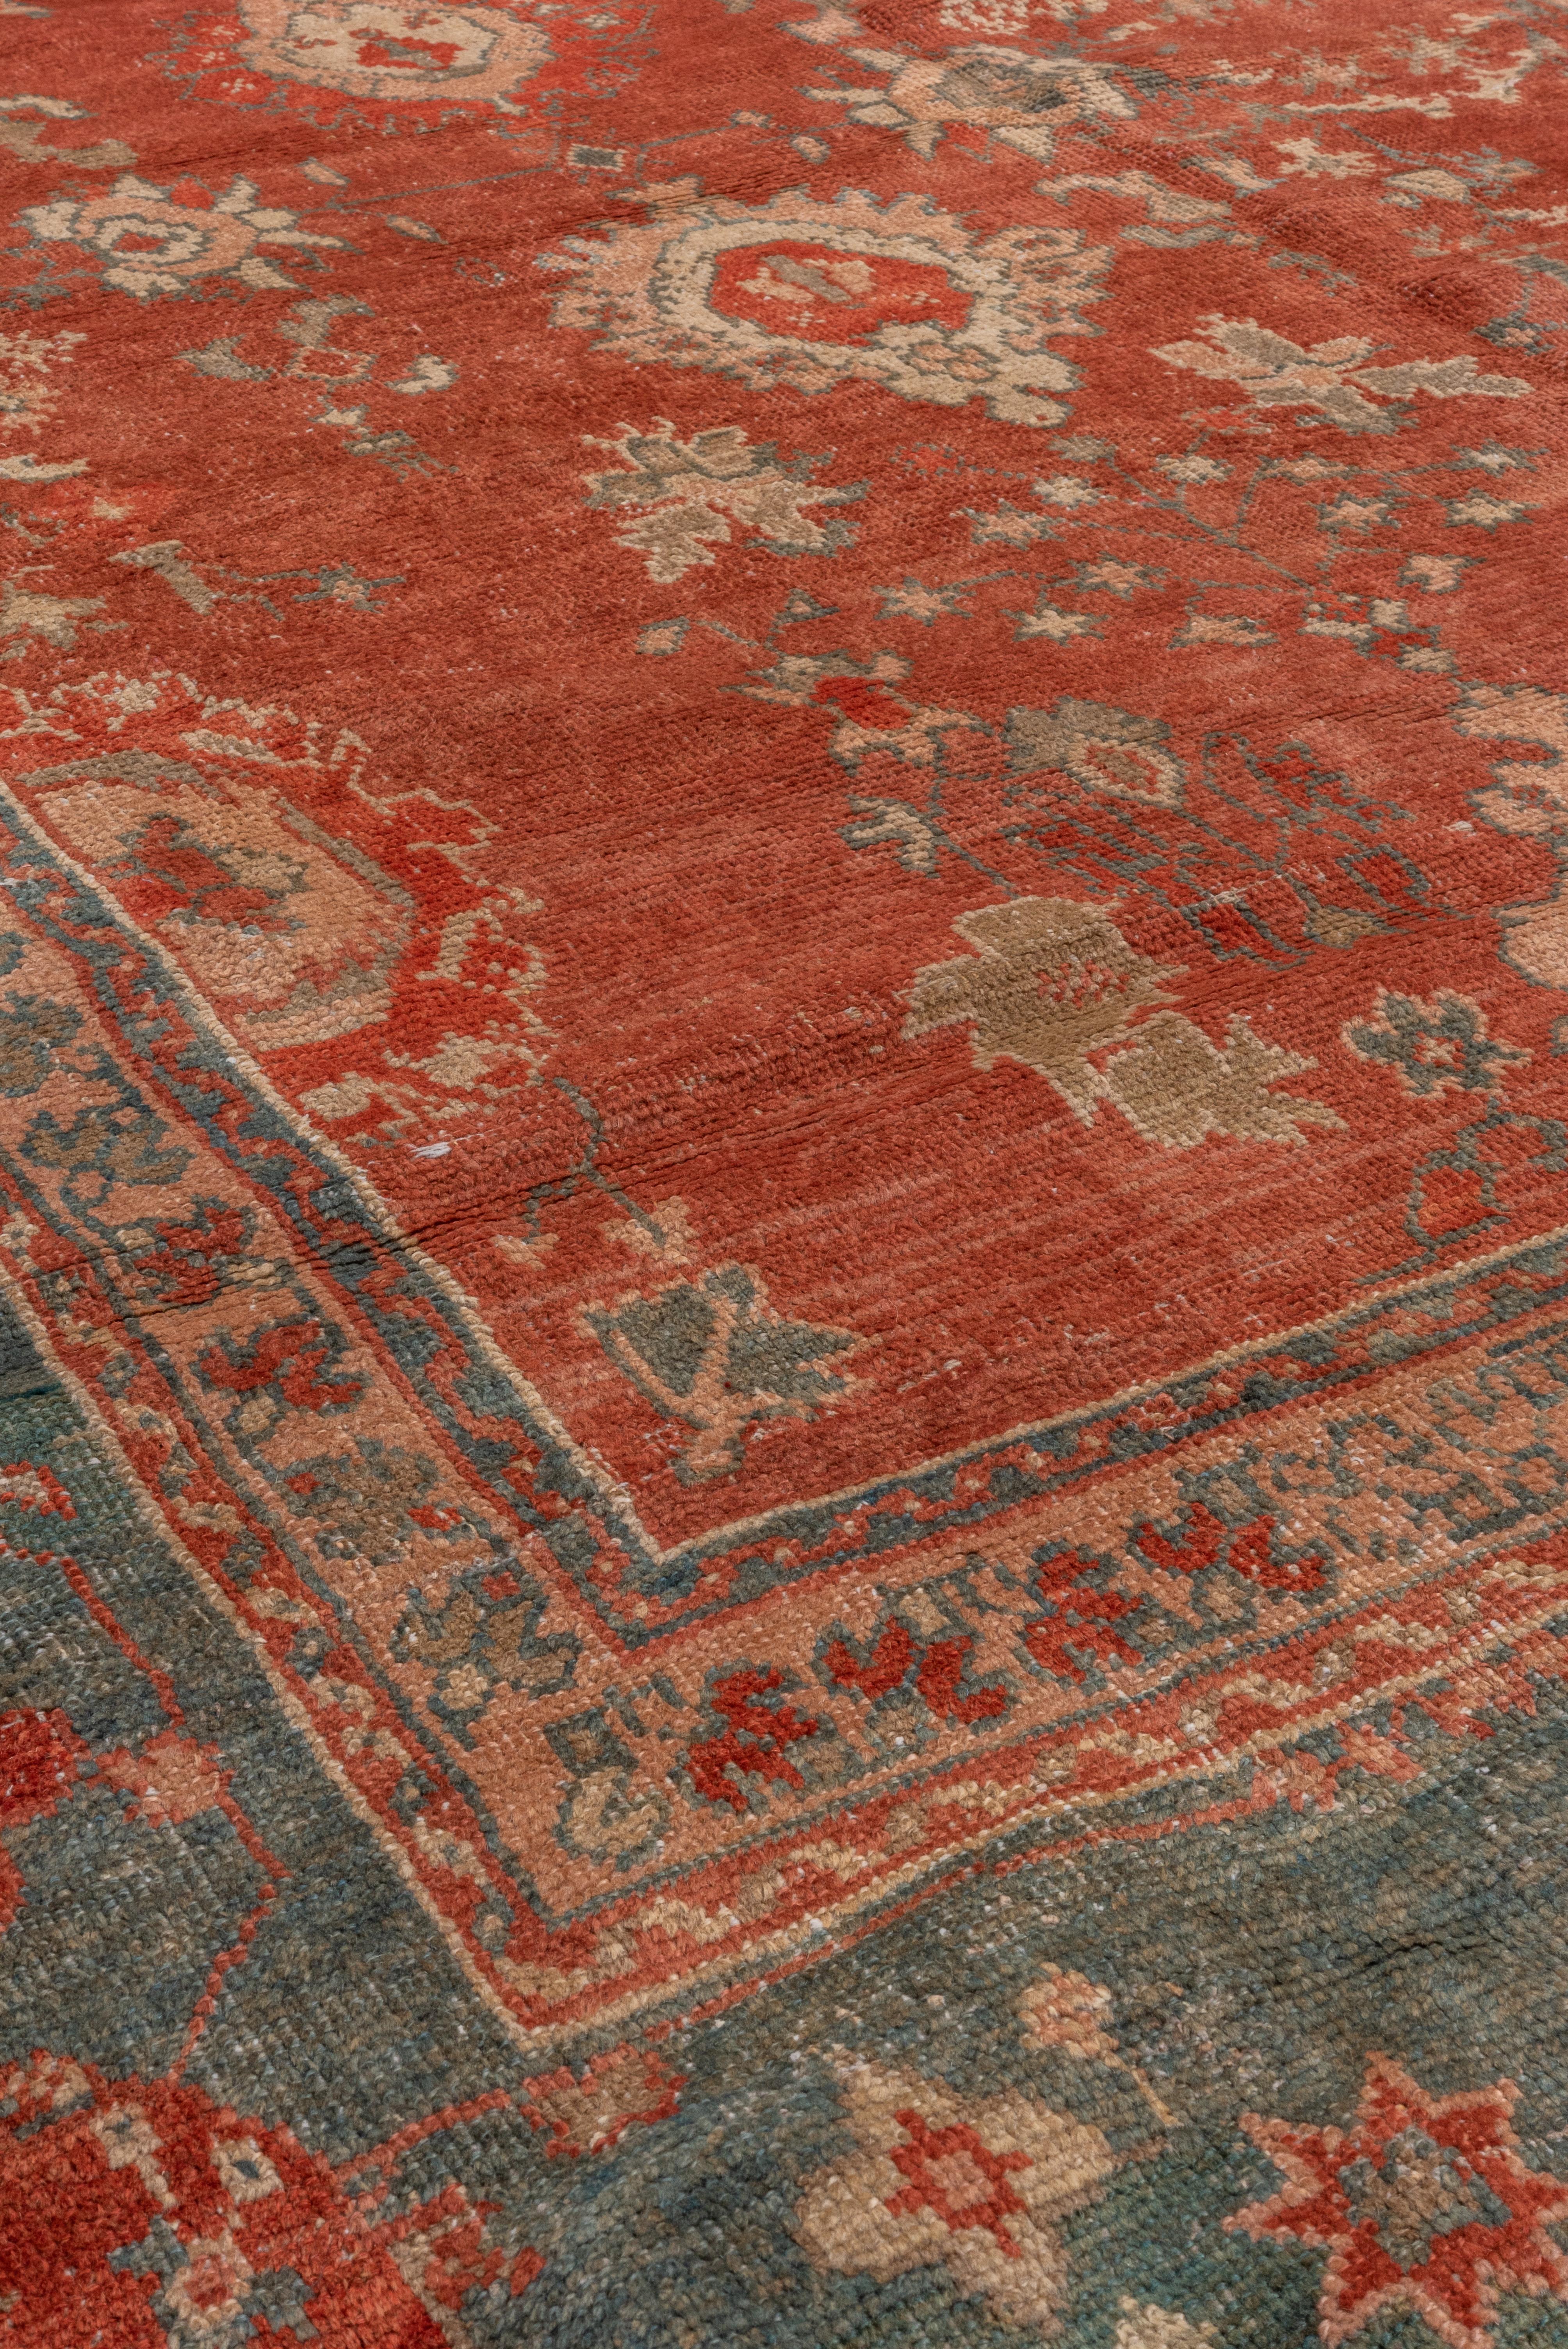 Wool 1900s Rare Antique Turkish Oushak Carpet, Rusty Red Allover Field, Green Borders For Sale